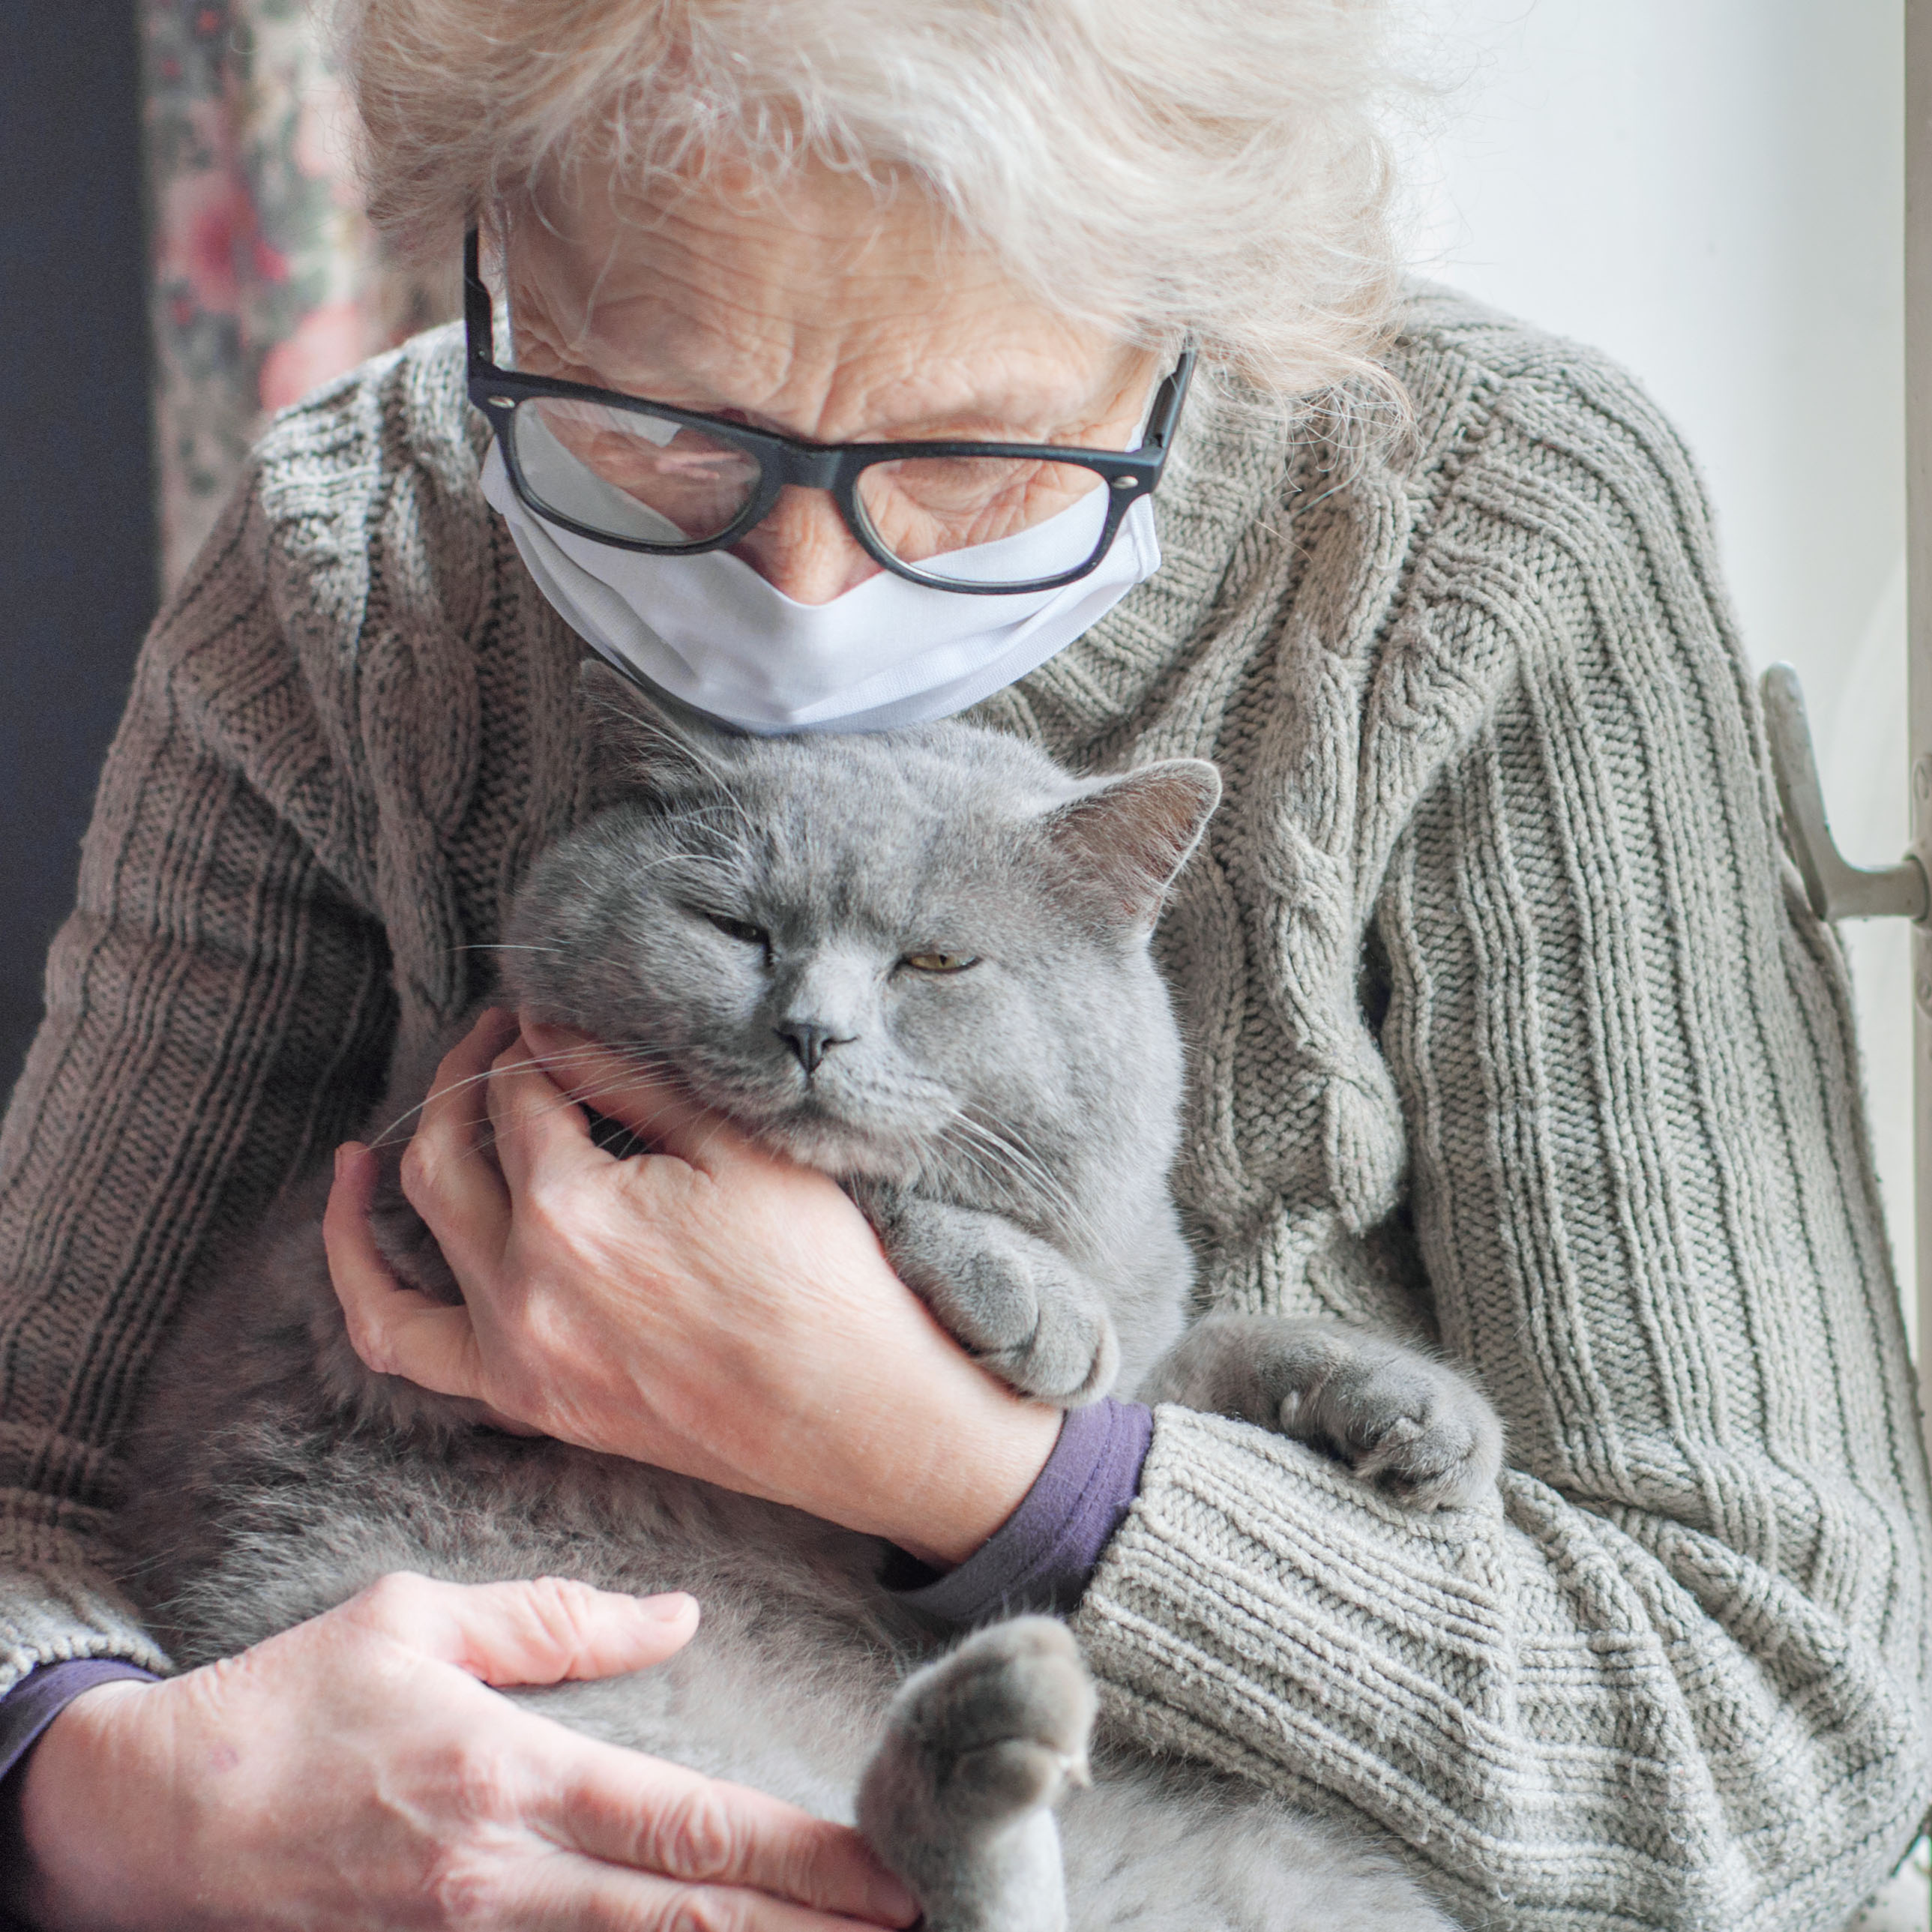 older person and cat-shutterstock_1867882090_web.jpg